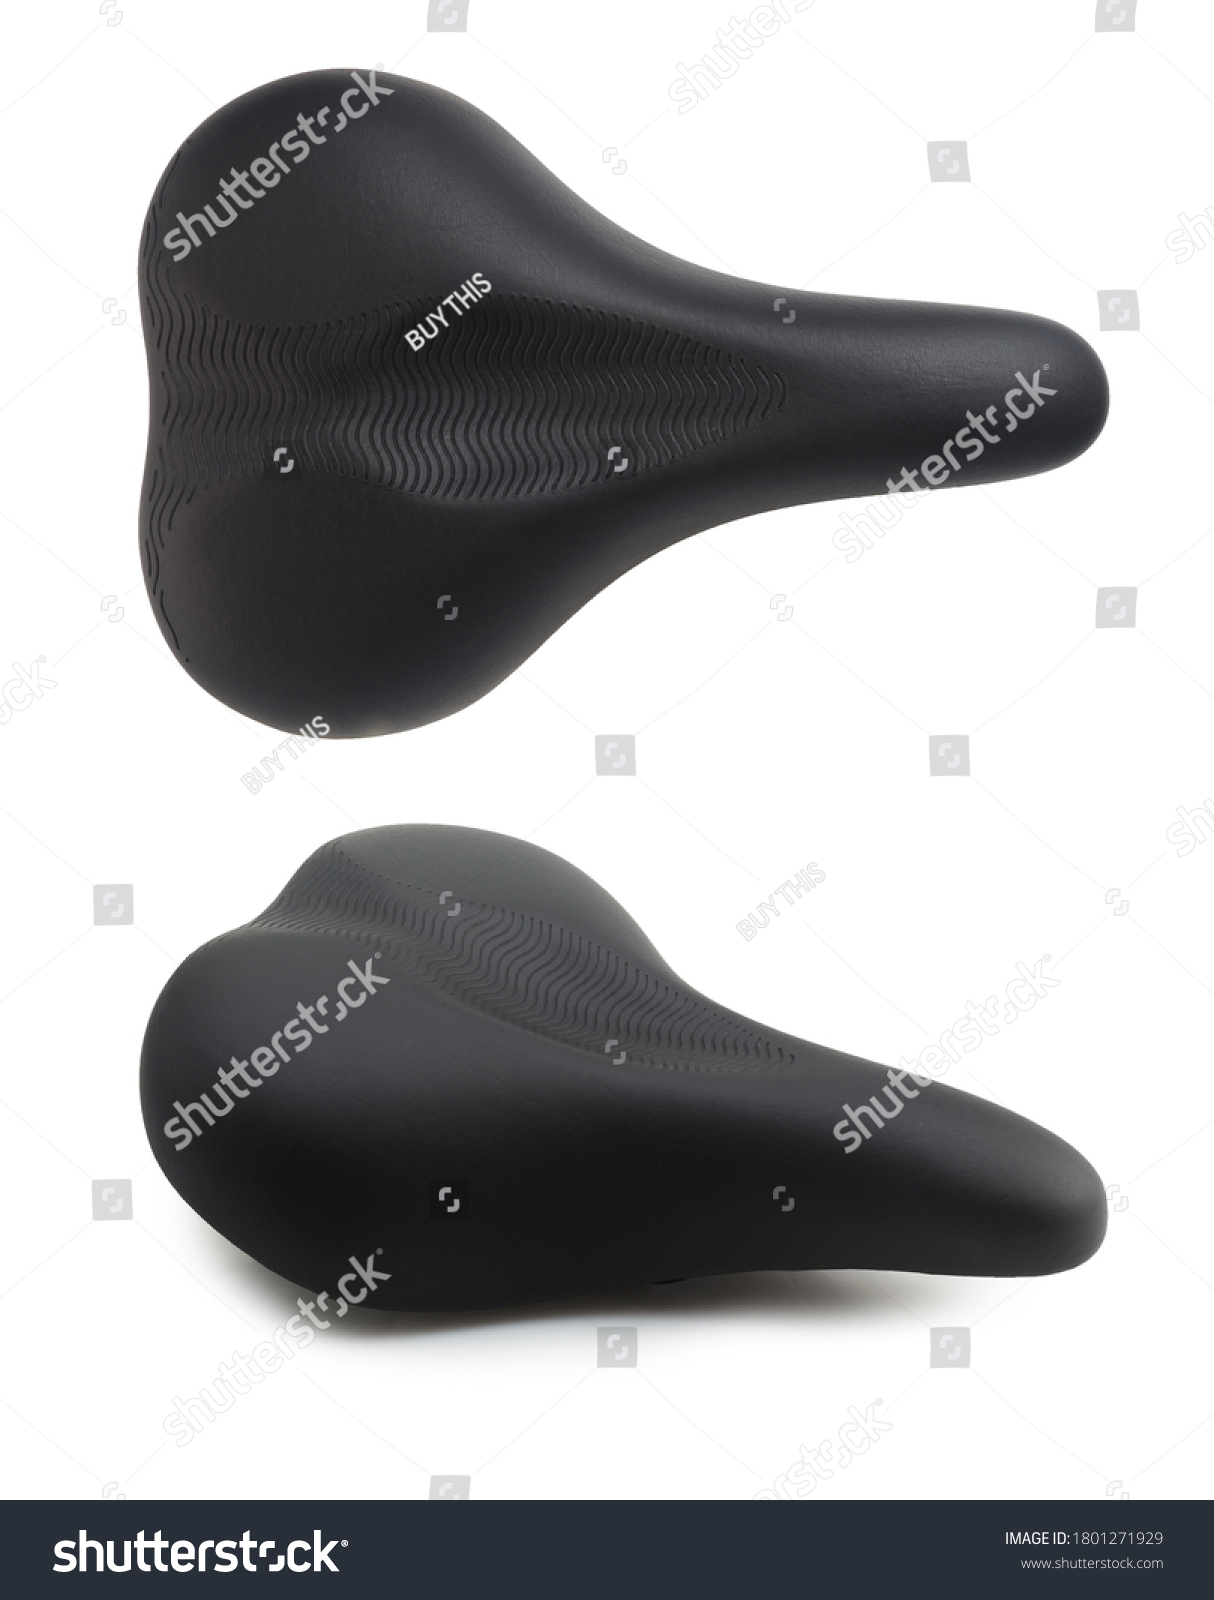 Bicycle seat in two angles. Top view and side view. Isolated on white background. #1801271929